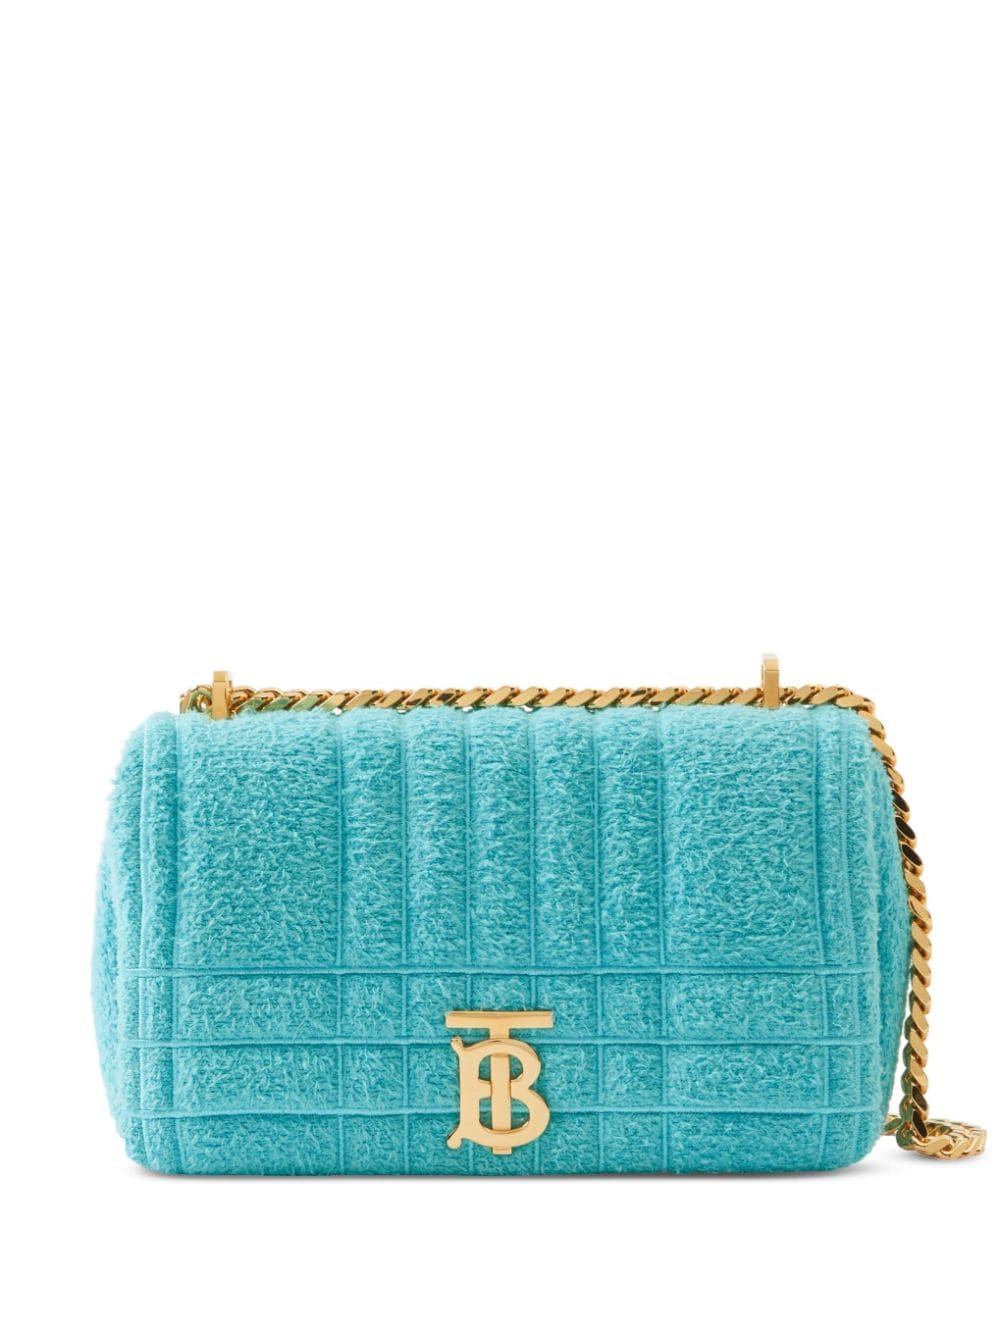 Burberry Blue Lola Double Pouch Bag In Pale Blue